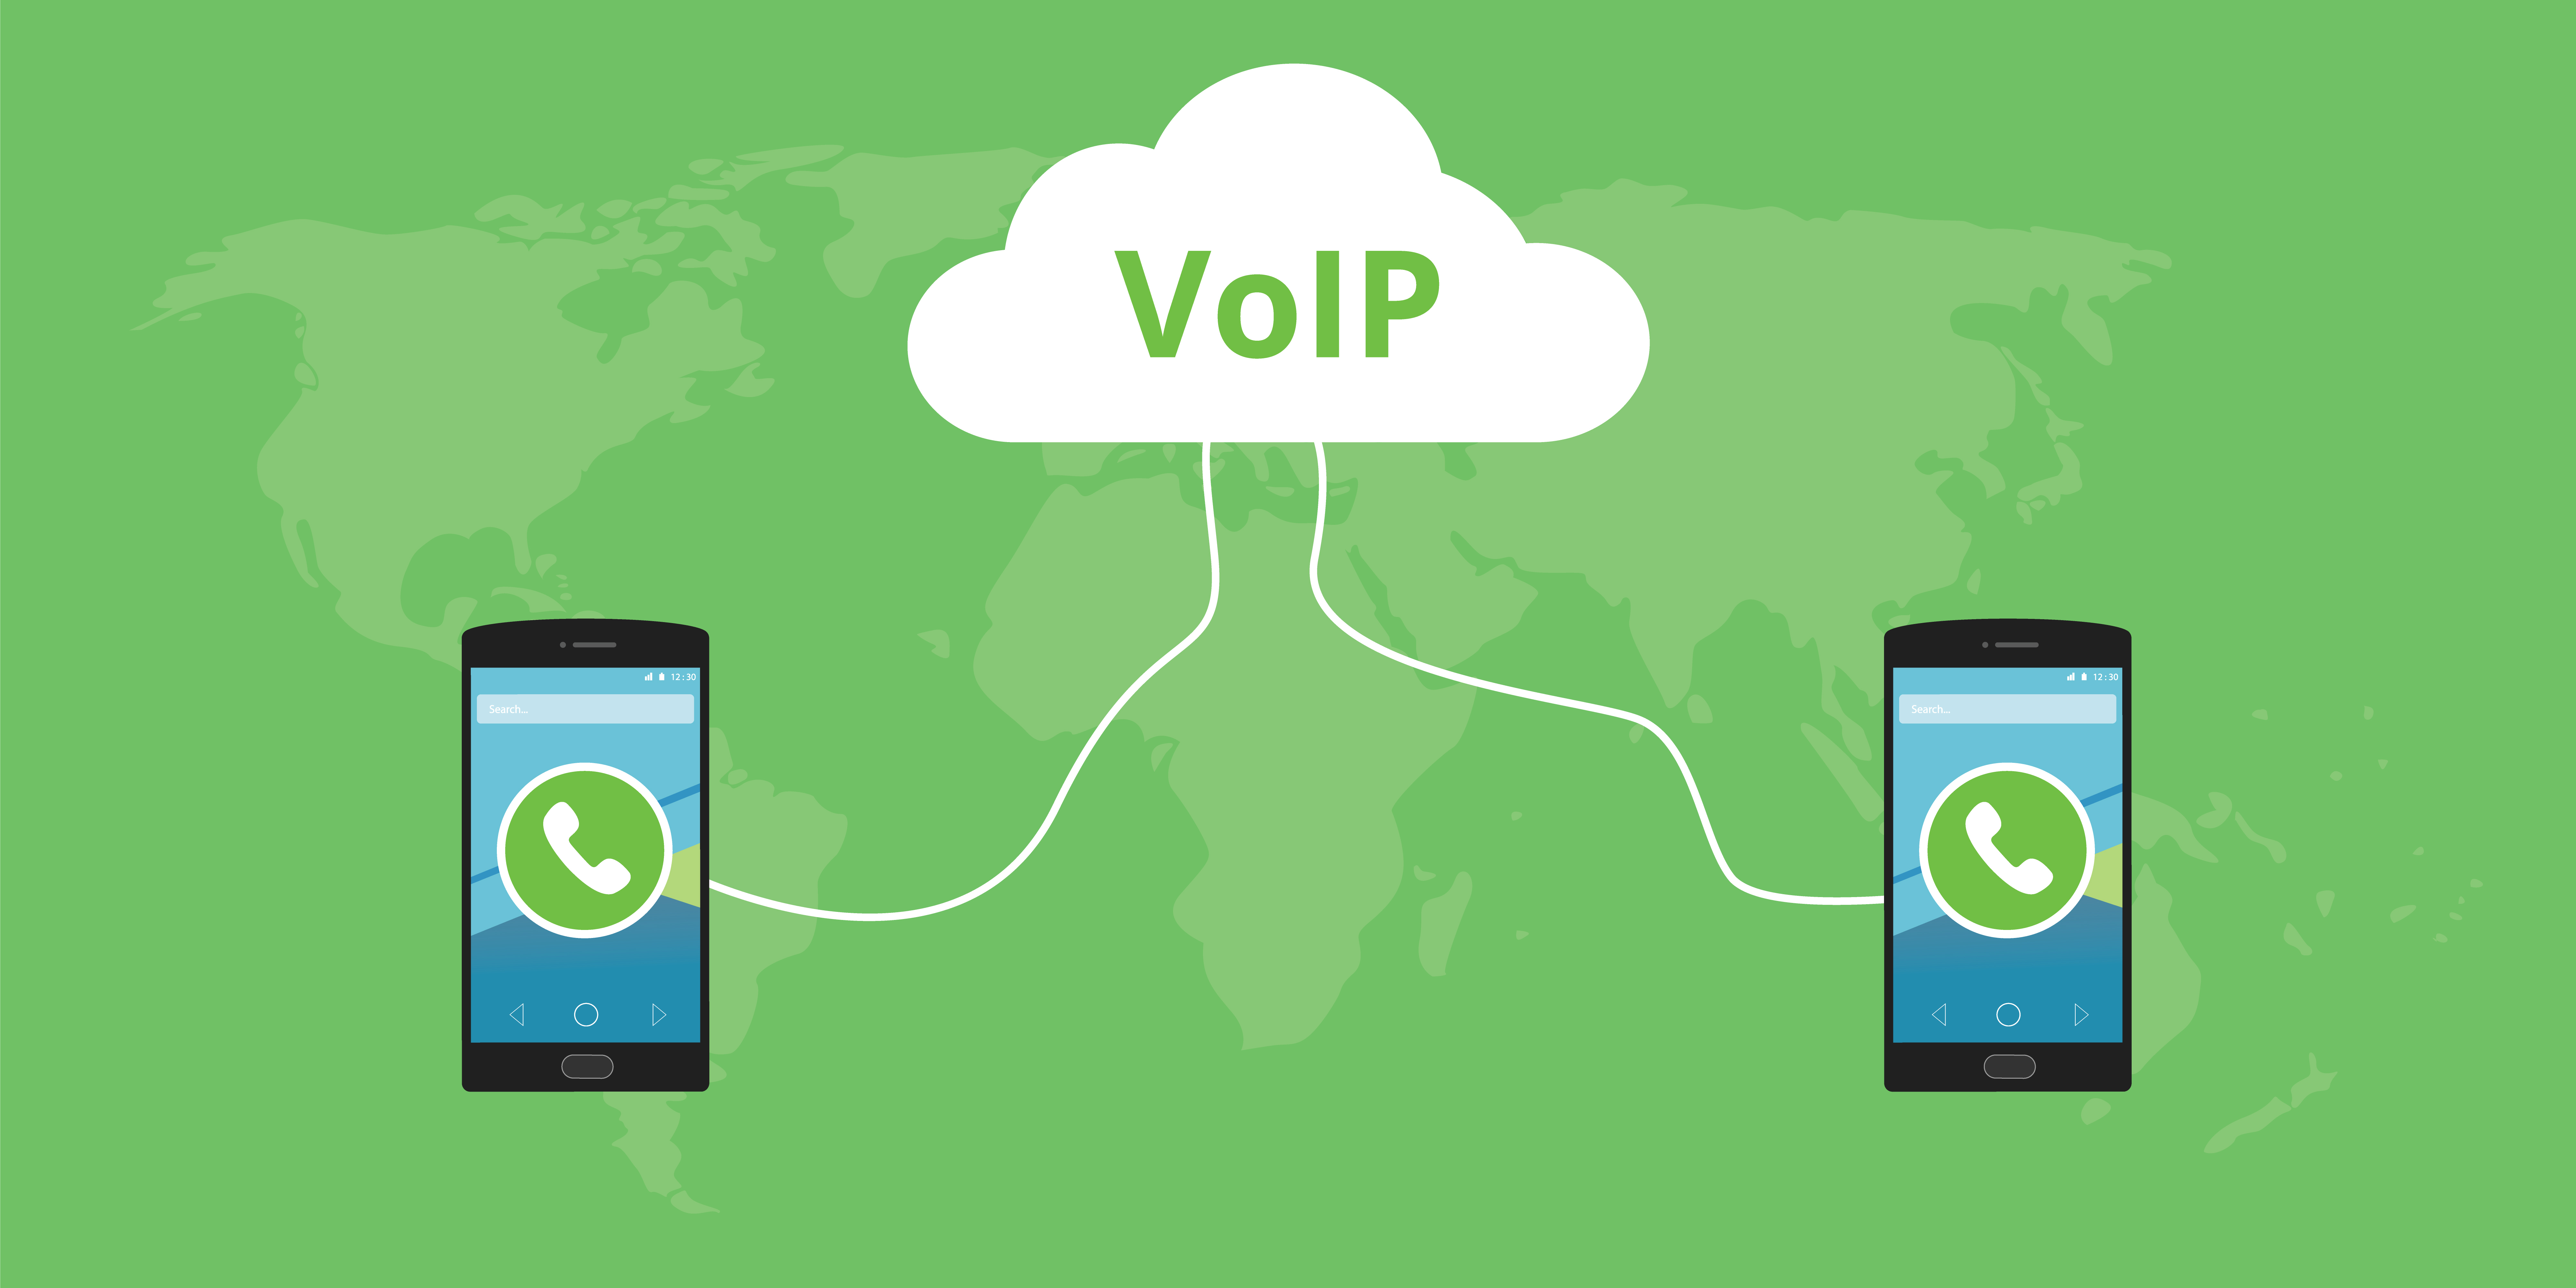 Denial of service attacks on VoIP systems